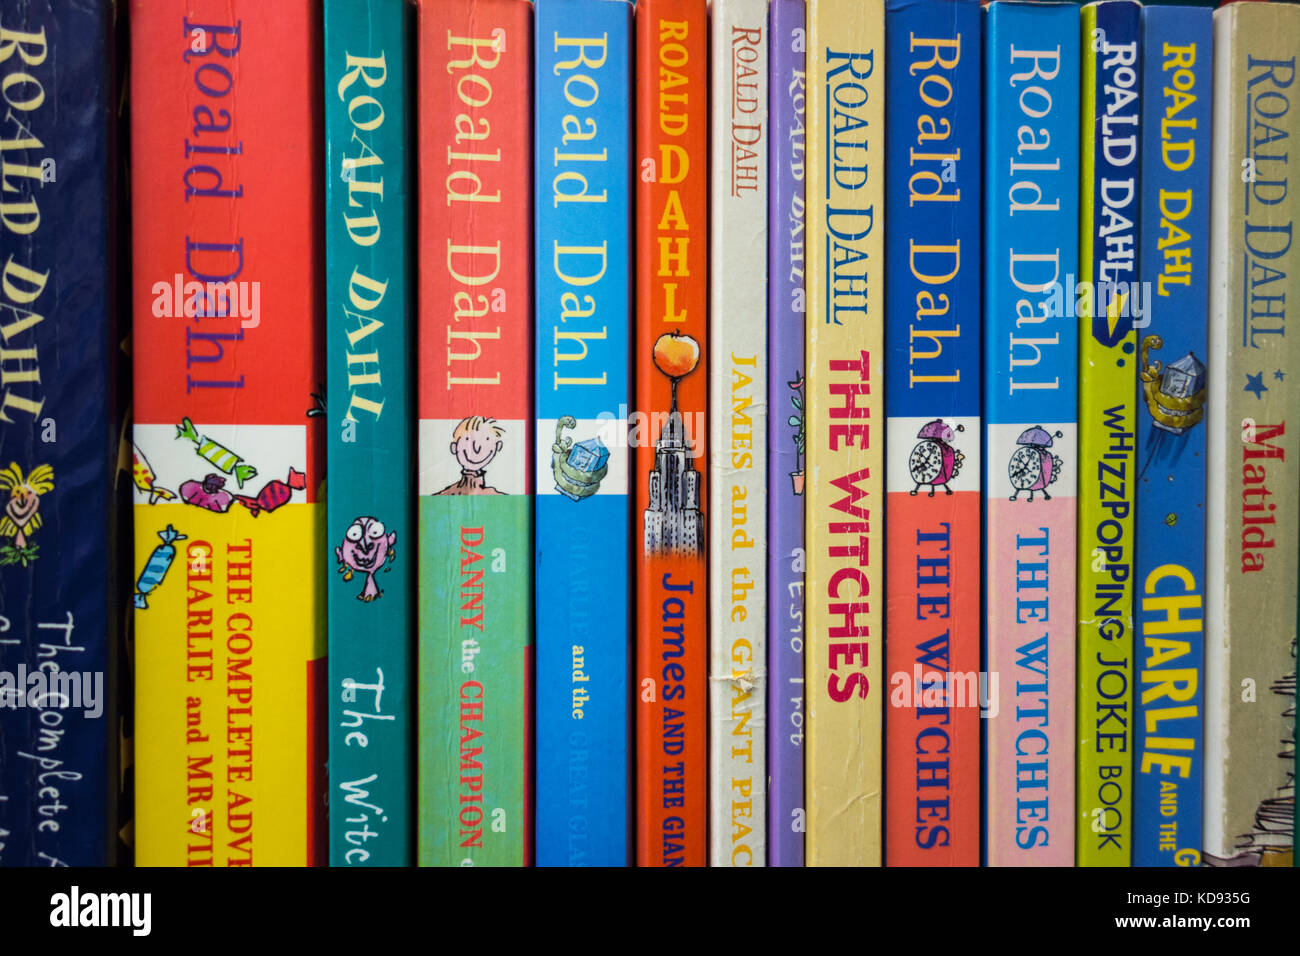 Closeup of a bookshelf of colourful Roald Dahl book covers and spines Stock Photo